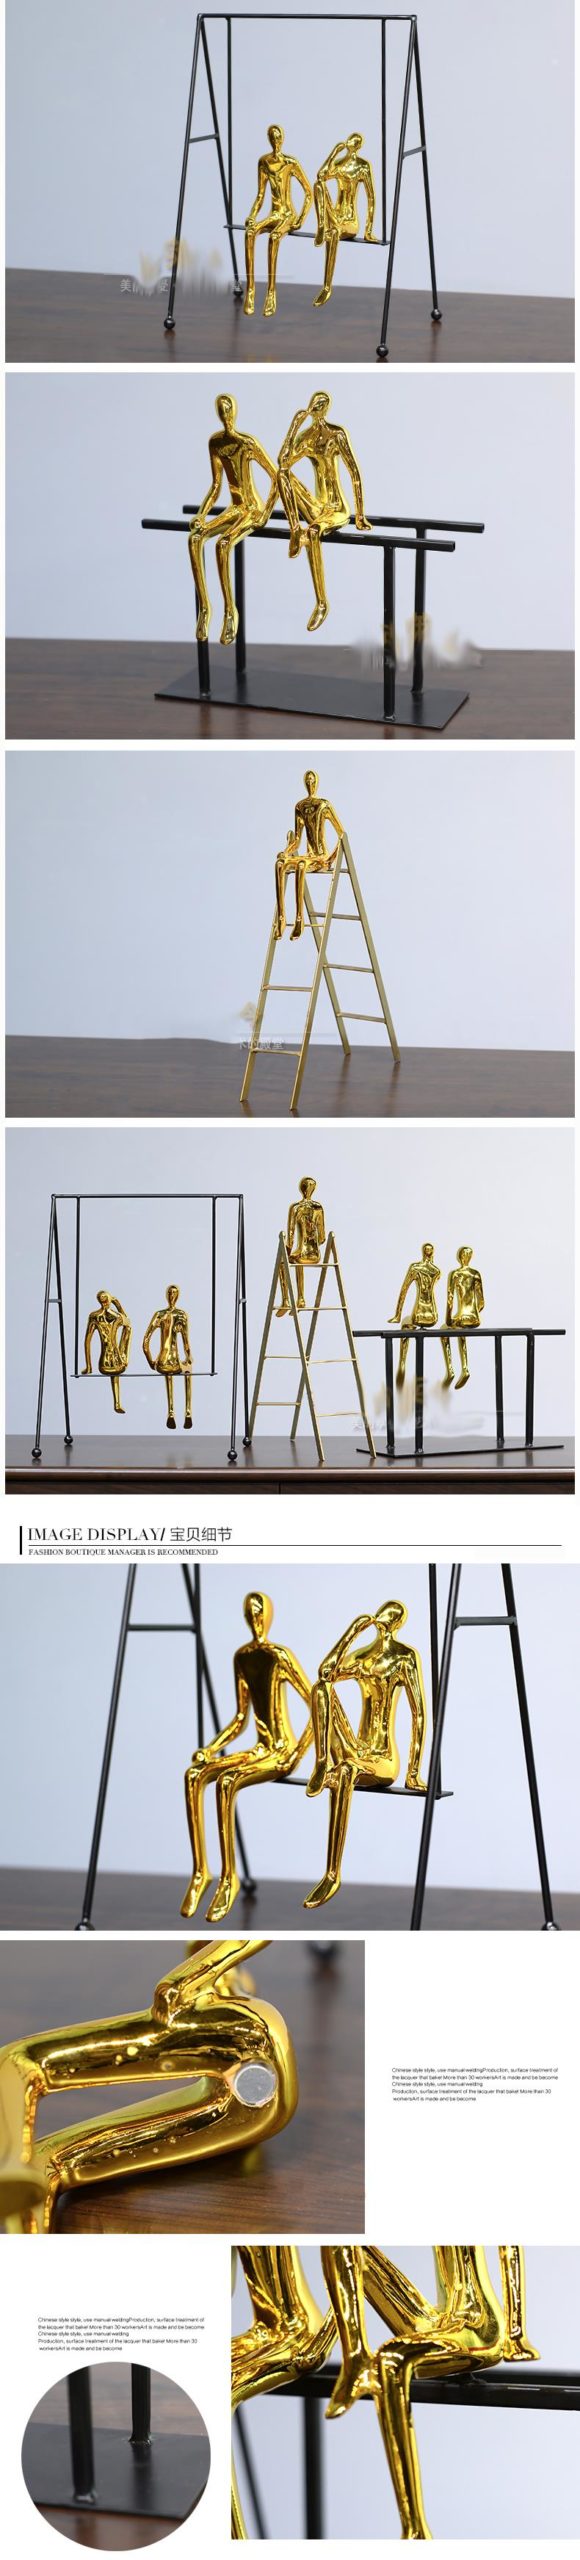 Two Abstract Golden Figures Sitting On The Parallel Bars Statue Home Crafts Room Decorative Objects Office Metal Sculpture Gift